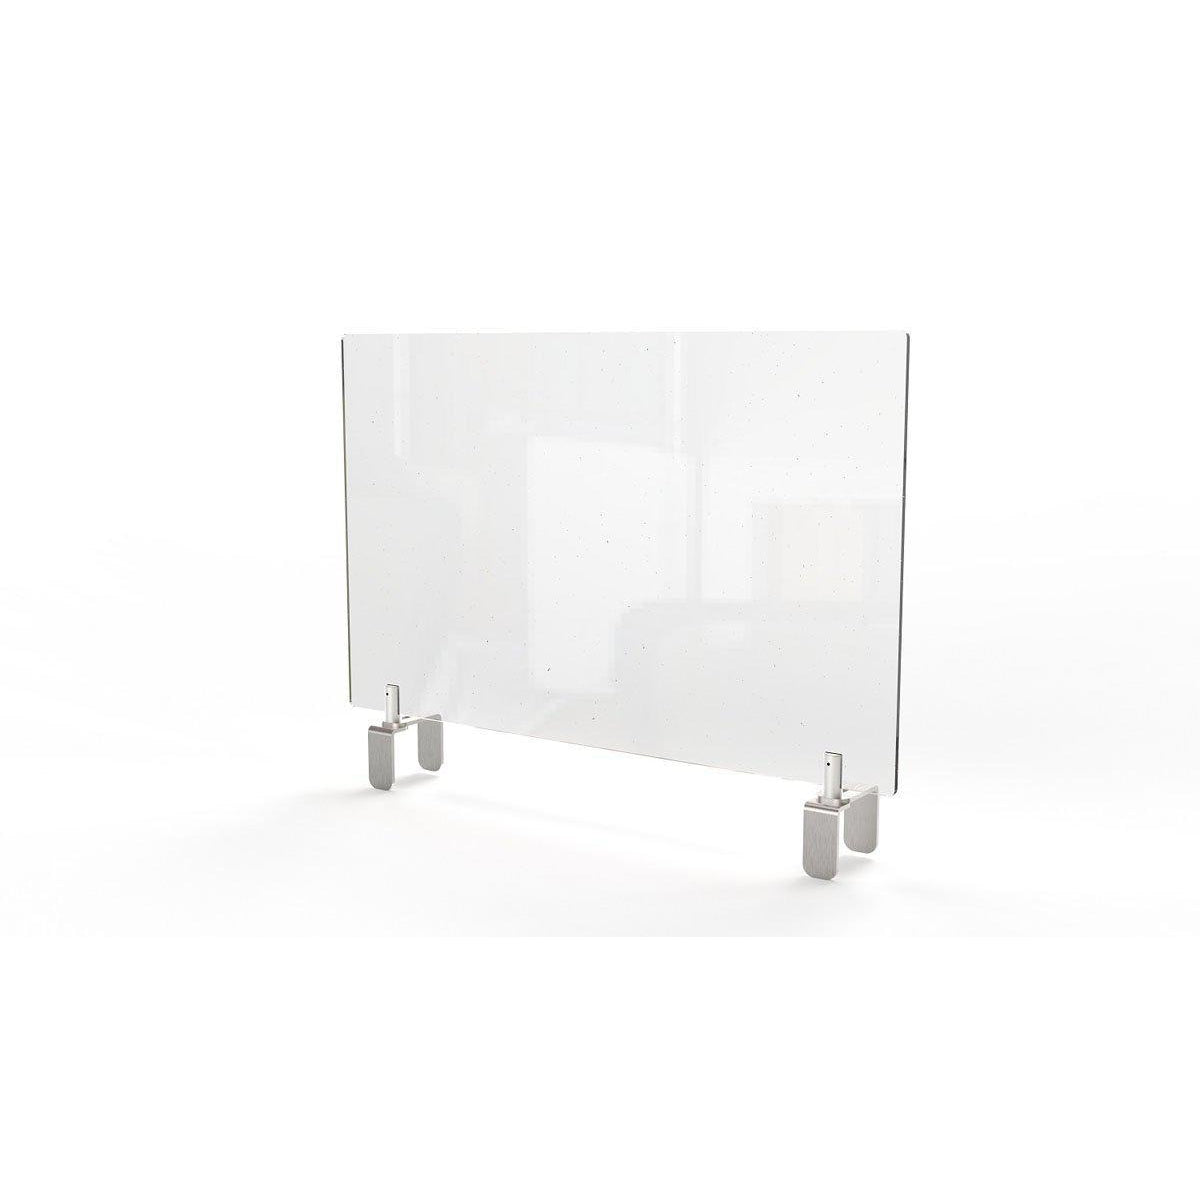 Clear Thermoplastic Partition & Cubicle Extender with Adjustable Clamp Attachment, 18"H x 42"W